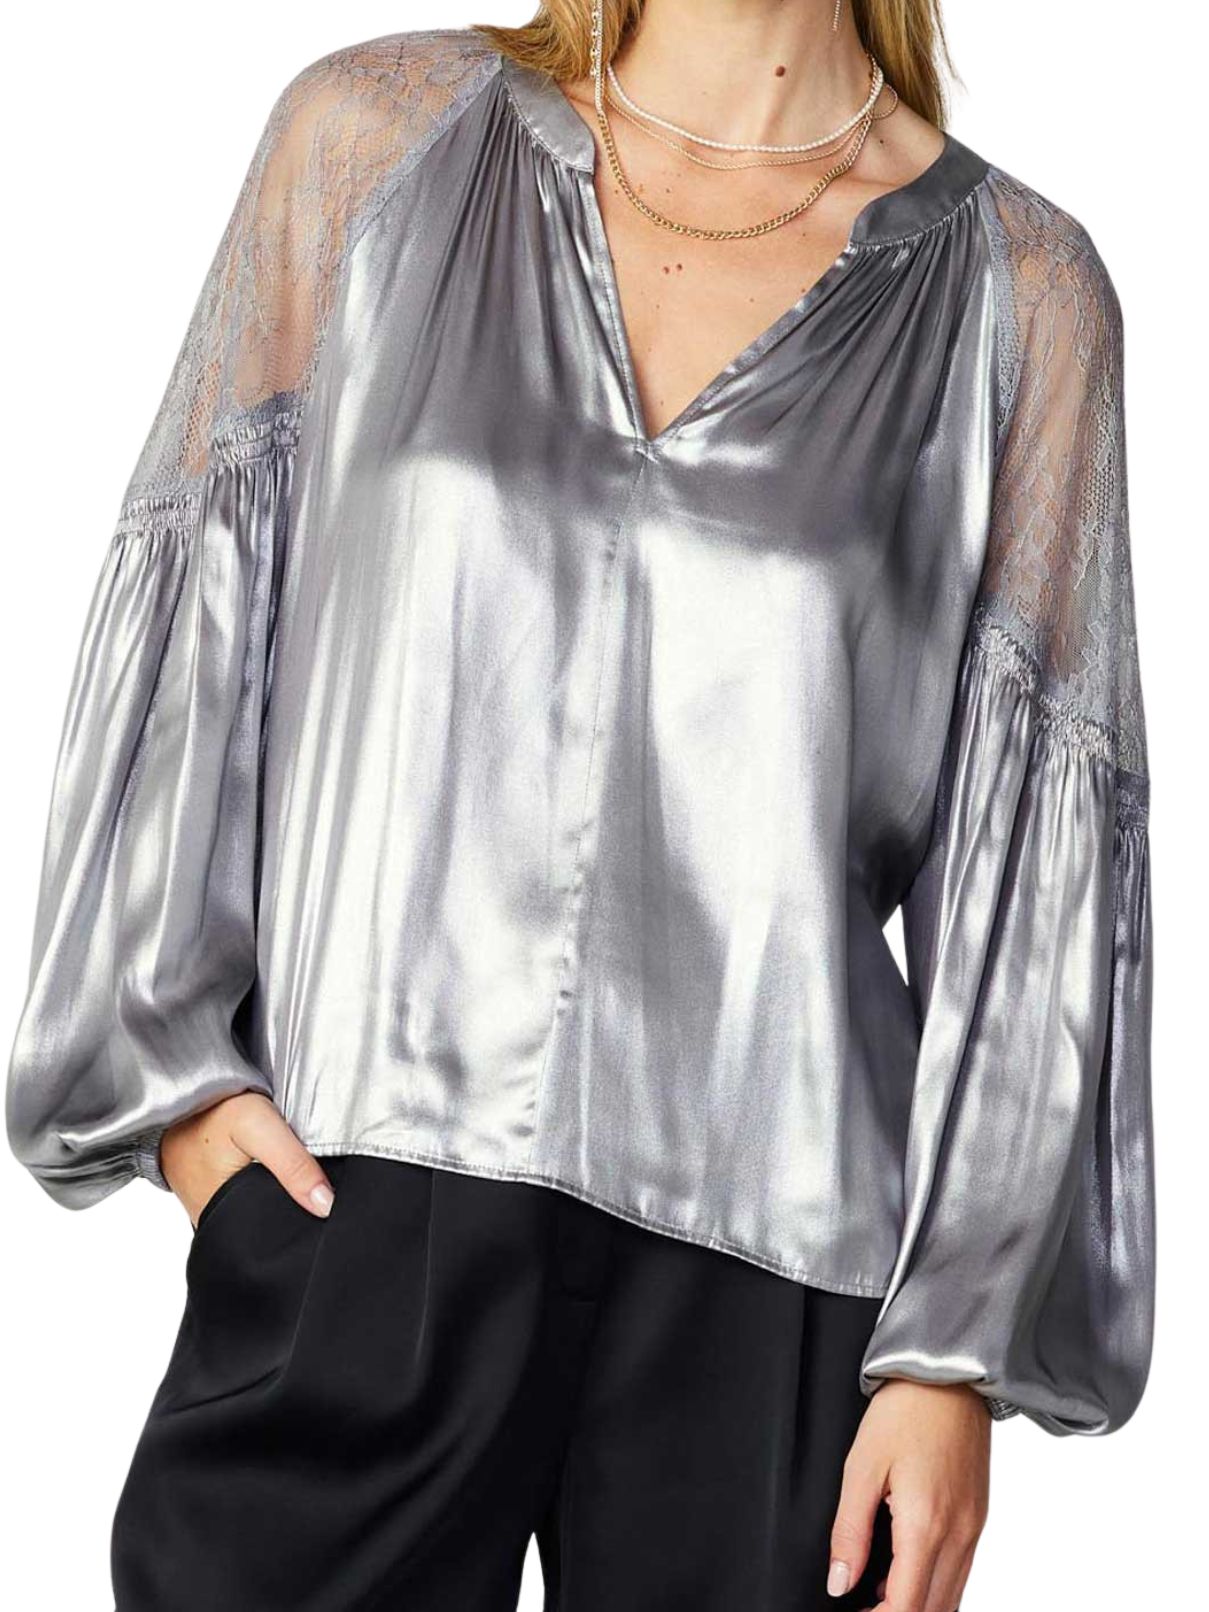 Current Air Split Neck Blouse in Silver | Cotton Island Women's ...